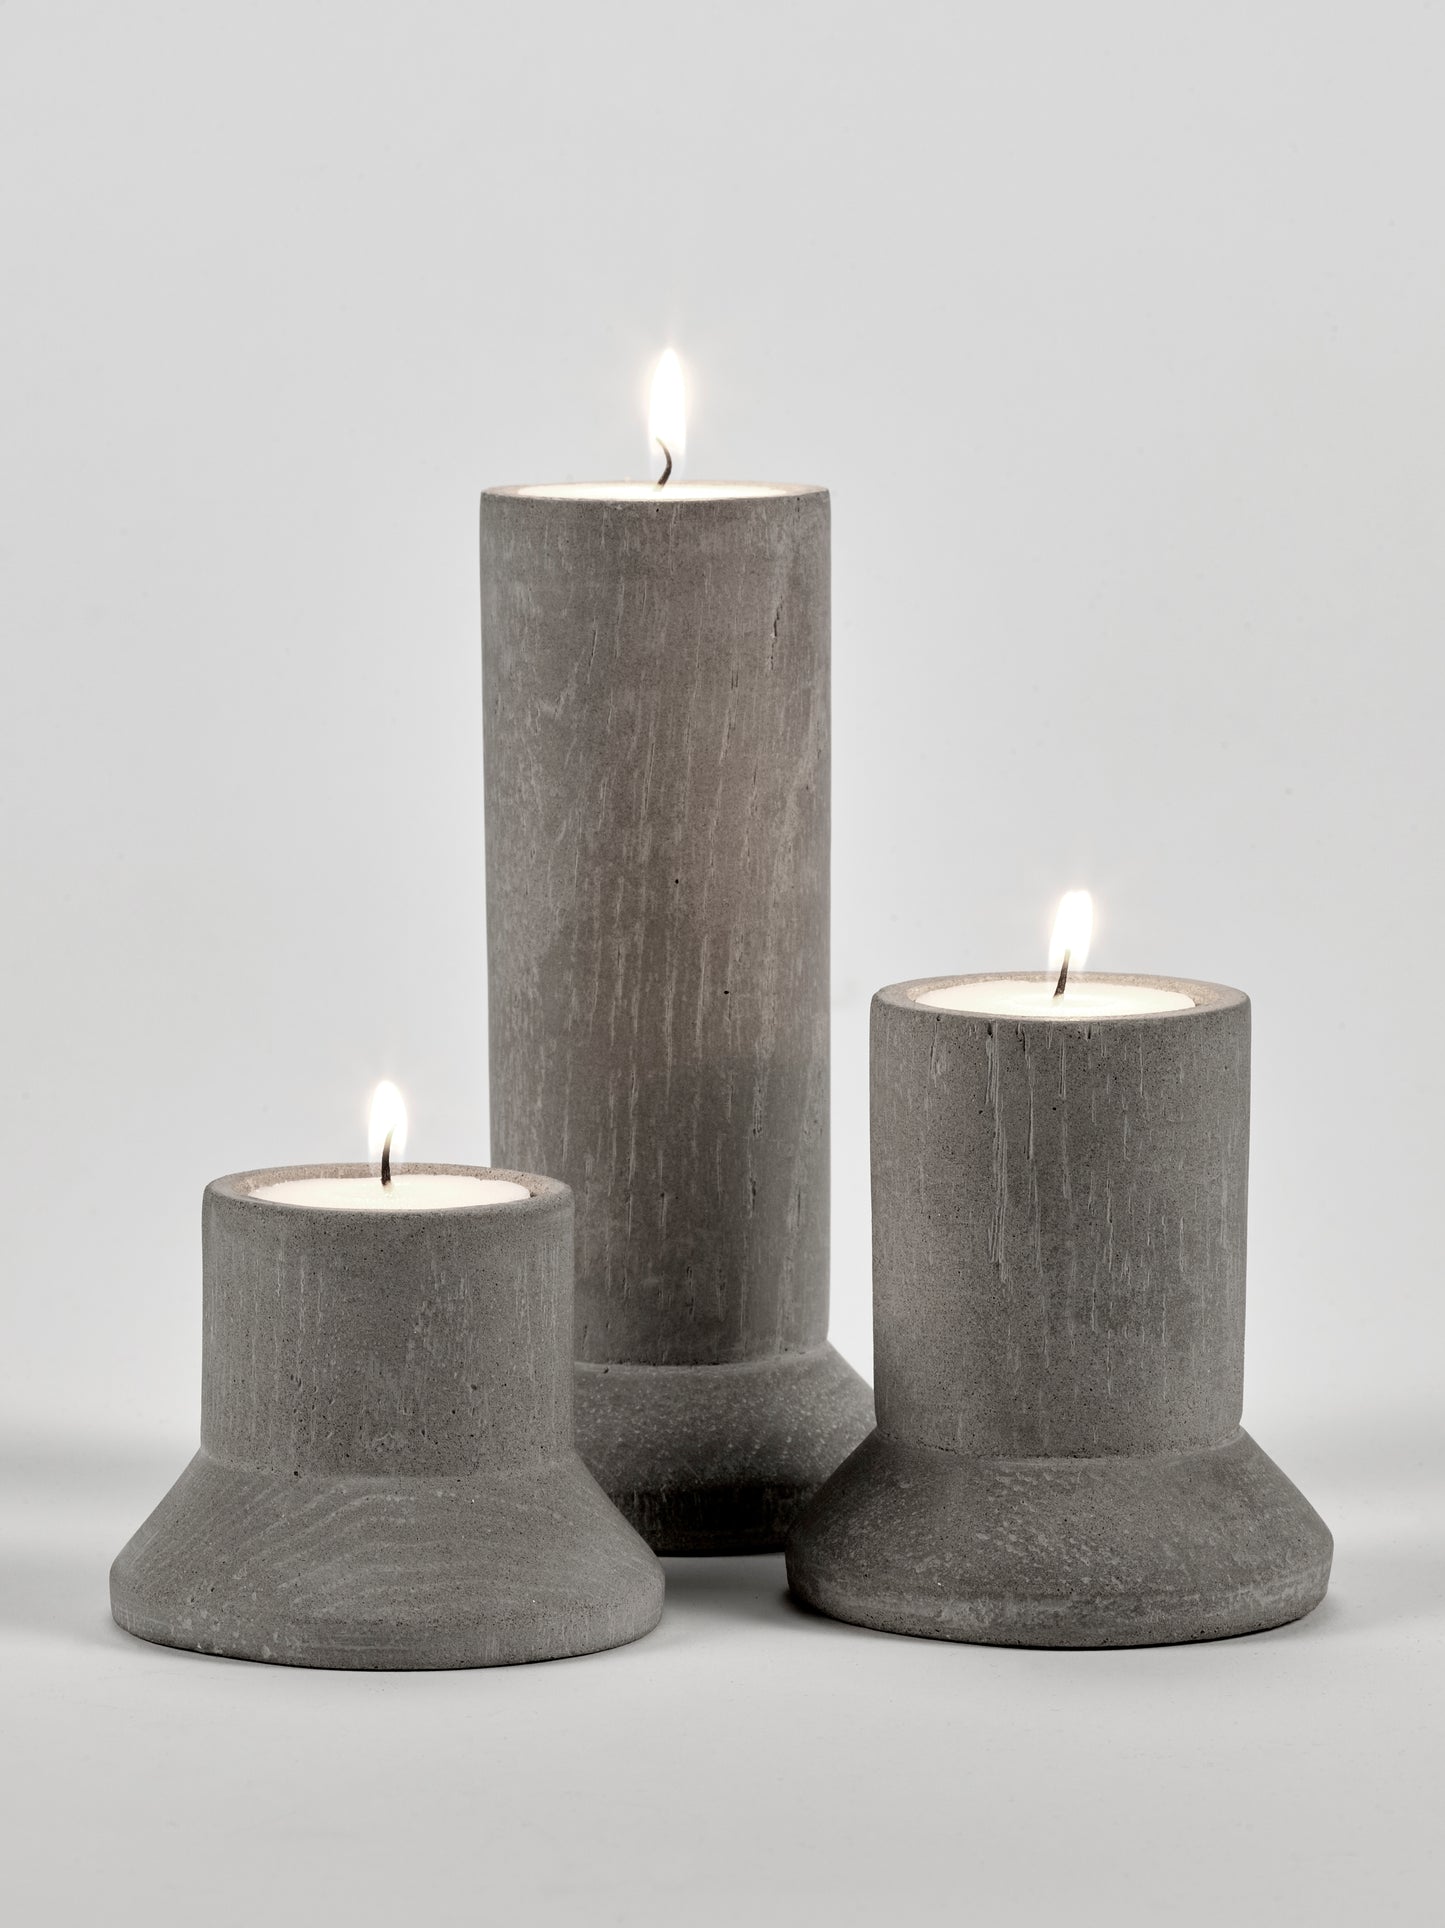 The Large Tower Candle Holder